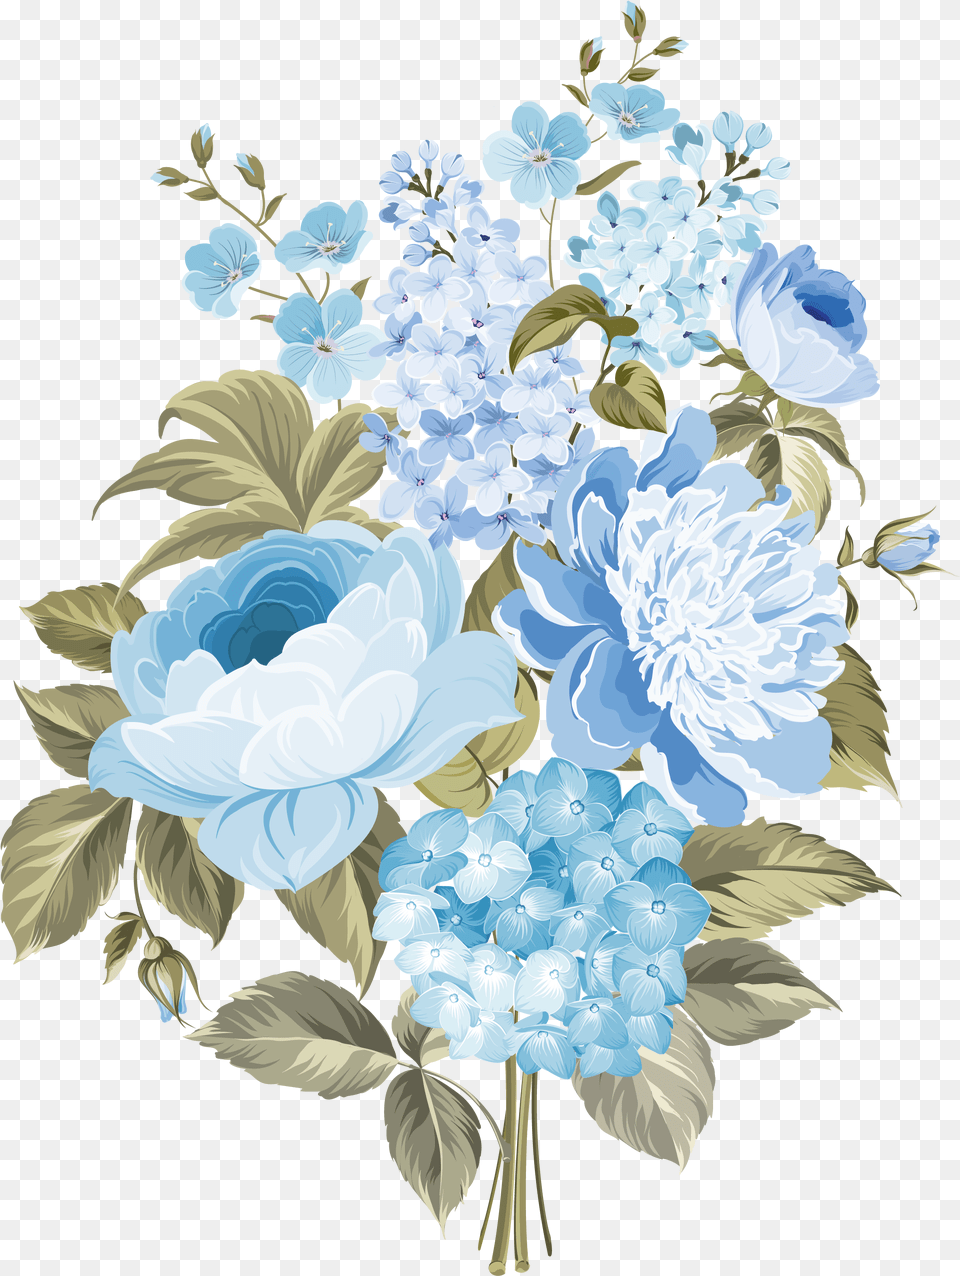 Blue And White Flowers Image White And Blue Flowers, Art, Floral Design, Graphics, Pattern Free Png